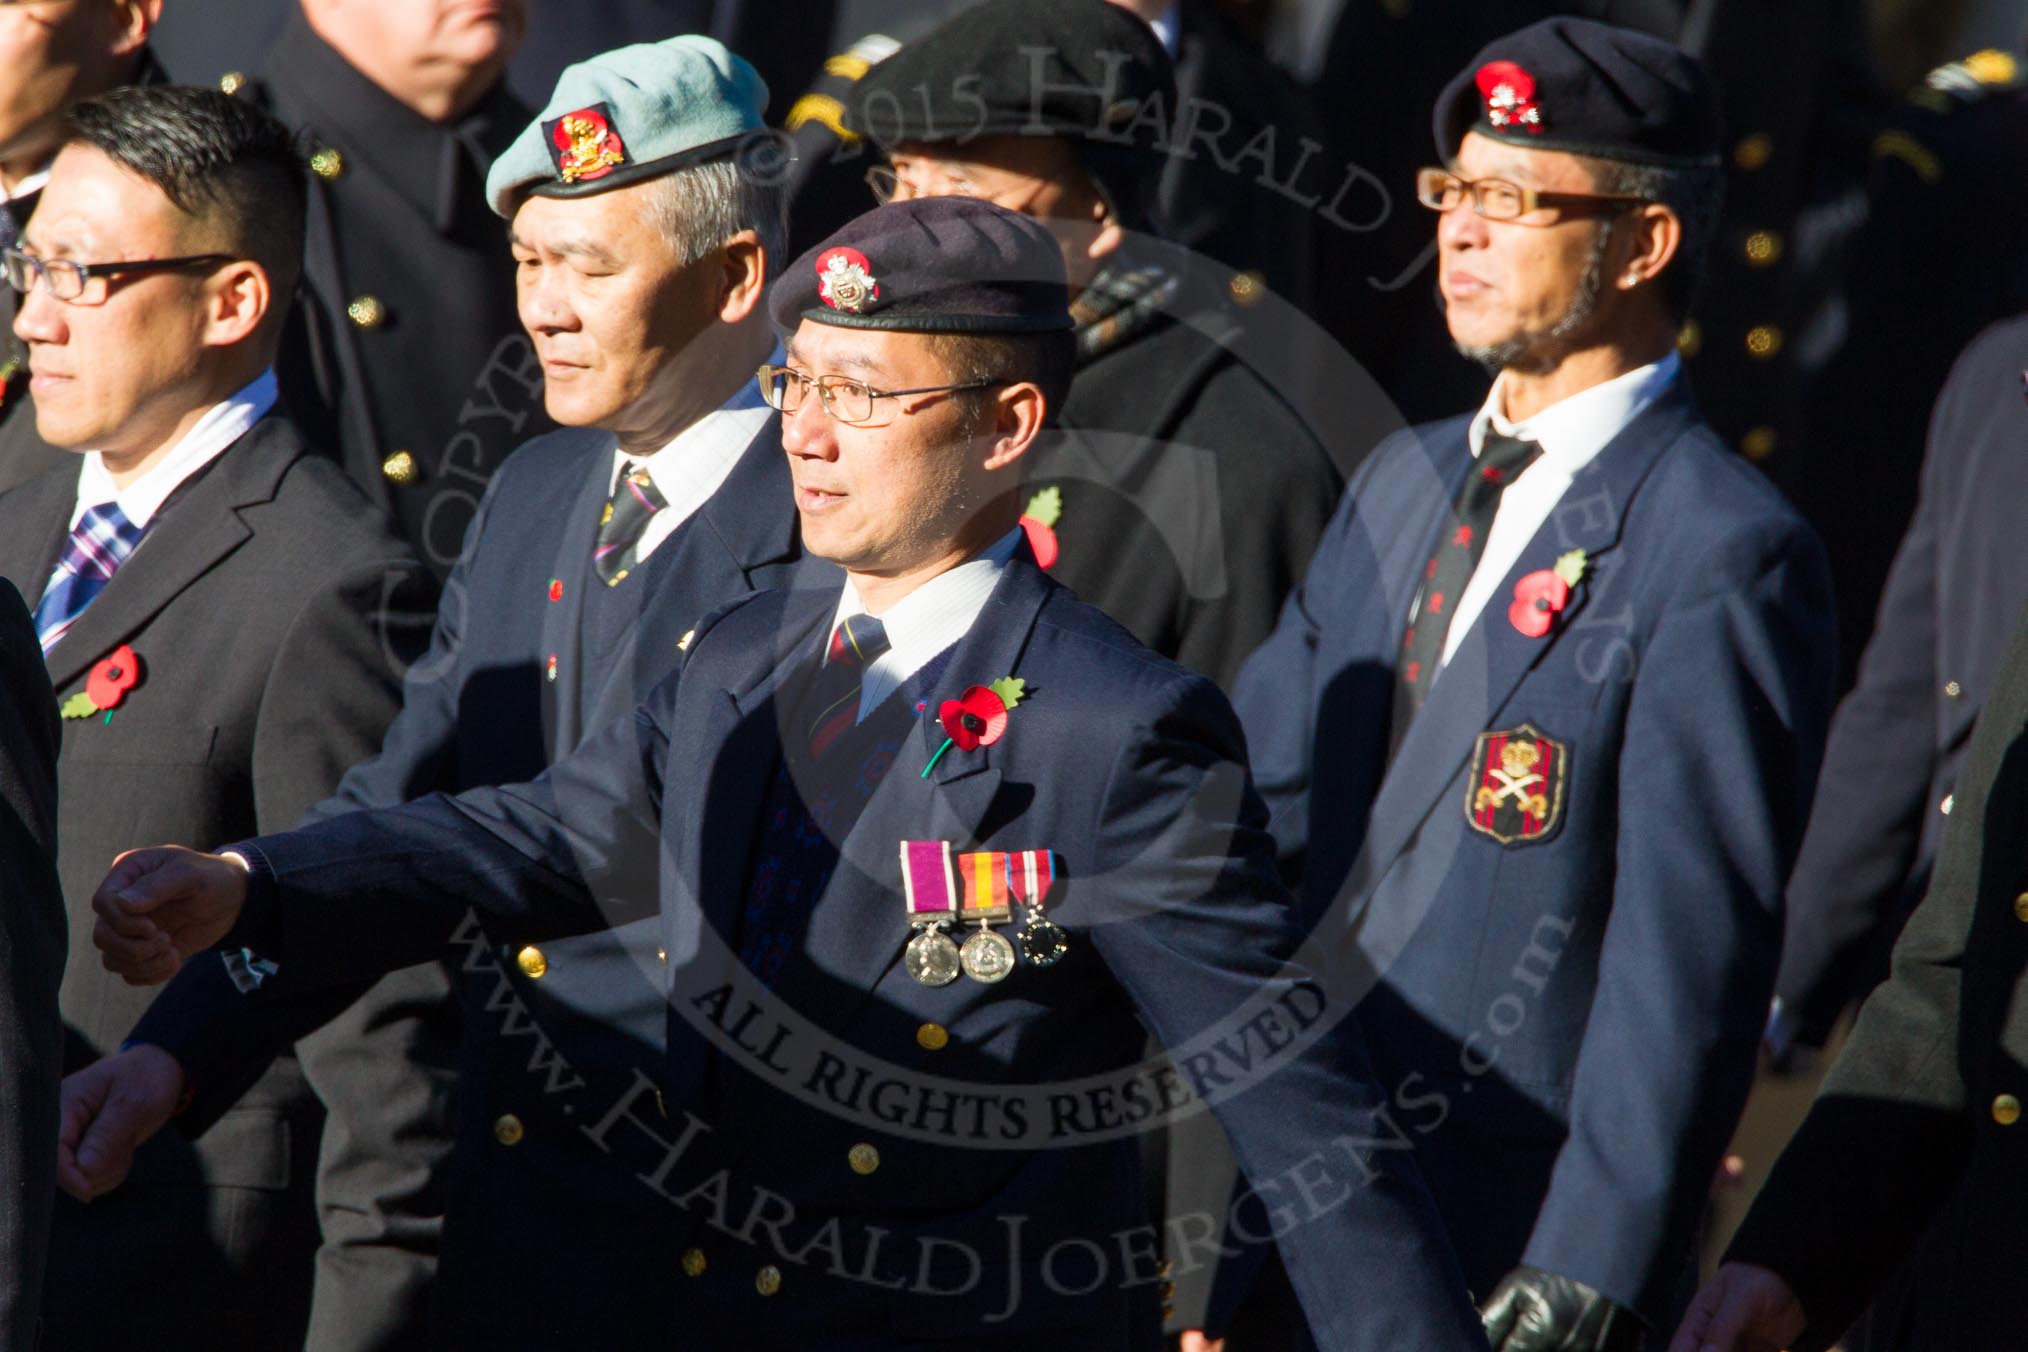 Remembrance Sunday Cenotaph March Past 2013: D9 - Hong Kong Ex-Servicemen's Association (UK Branch)..
Press stand opposite the Foreign Office building, Whitehall, London SW1,
London,
Greater London,
United Kingdom,
on 10 November 2013 at 11:39, image #79